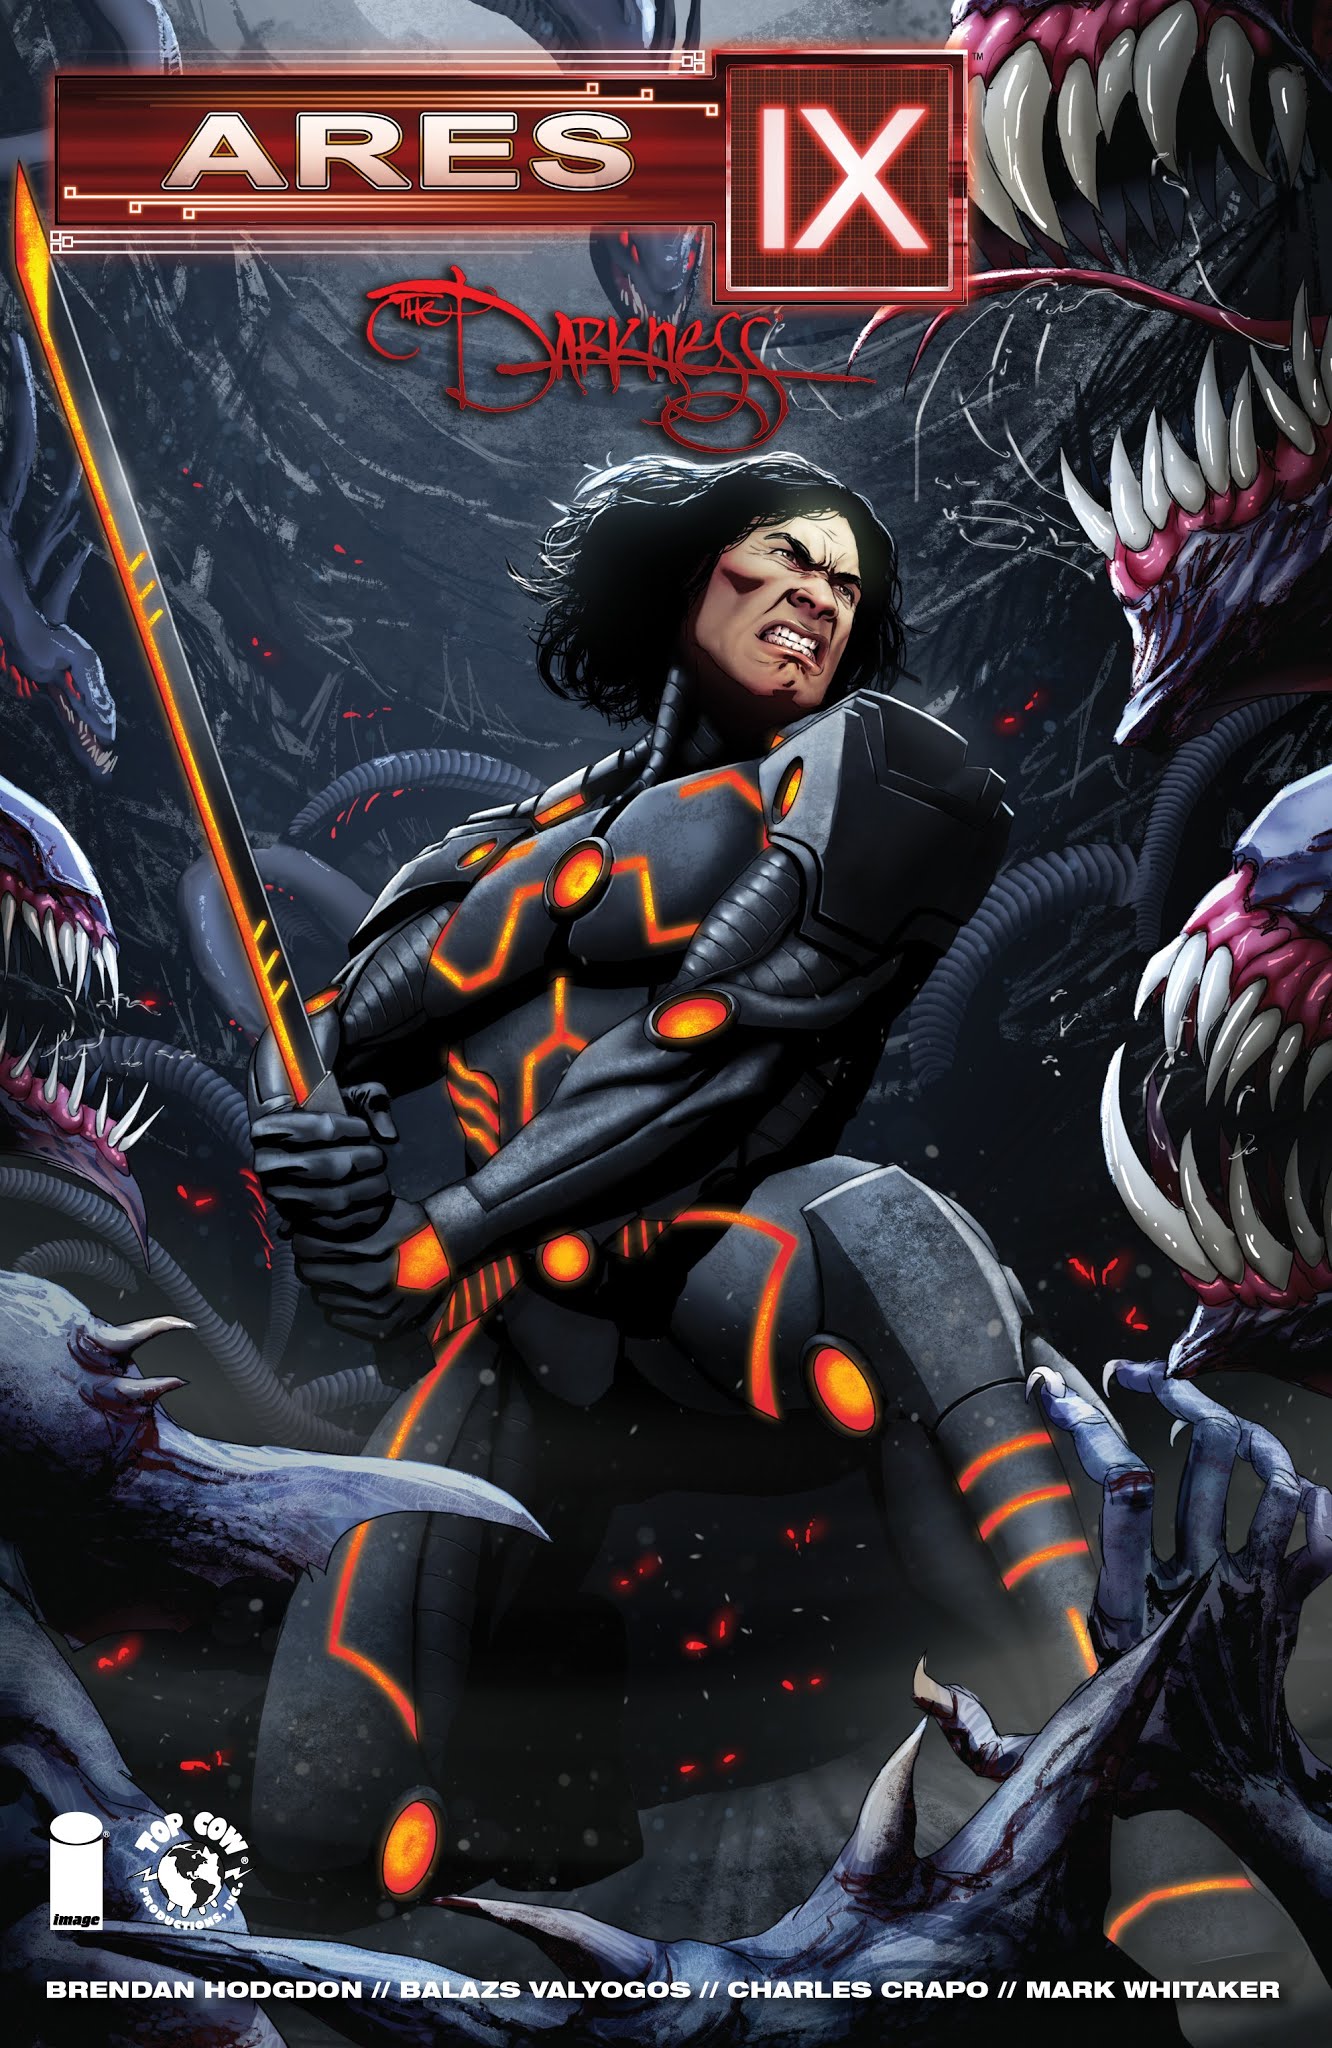 Read online Ares IX: Darkness comic -  Issue # Full - 1